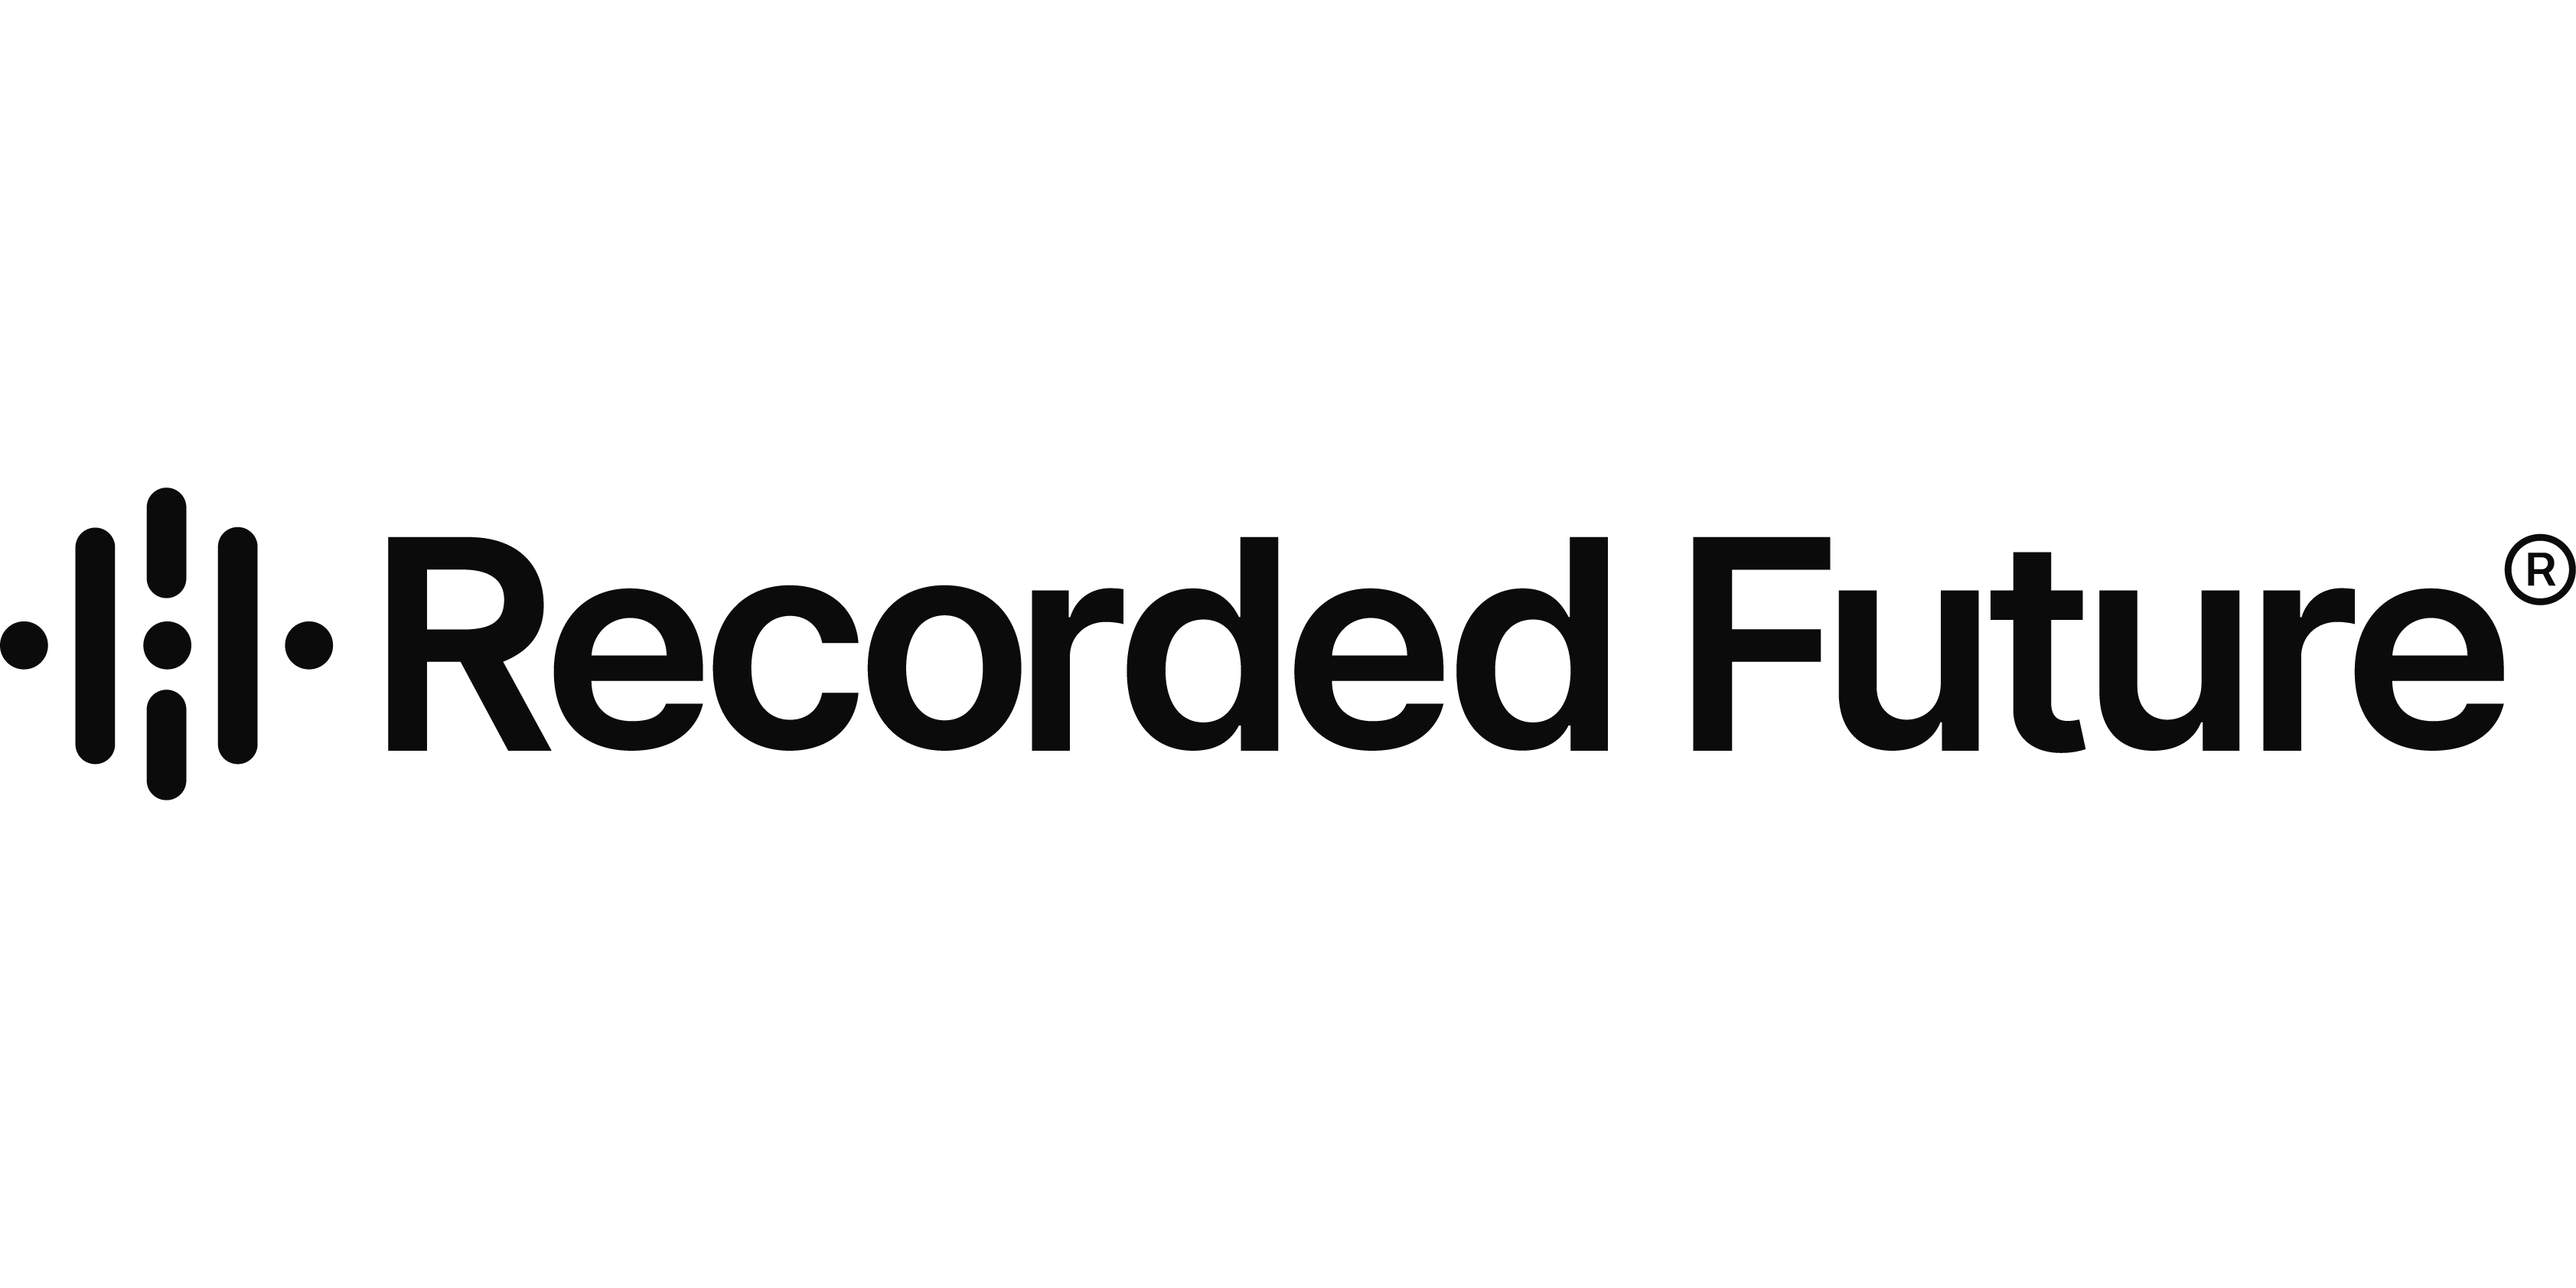 Updated_NEW_2021_Recorded Future_Logo.png